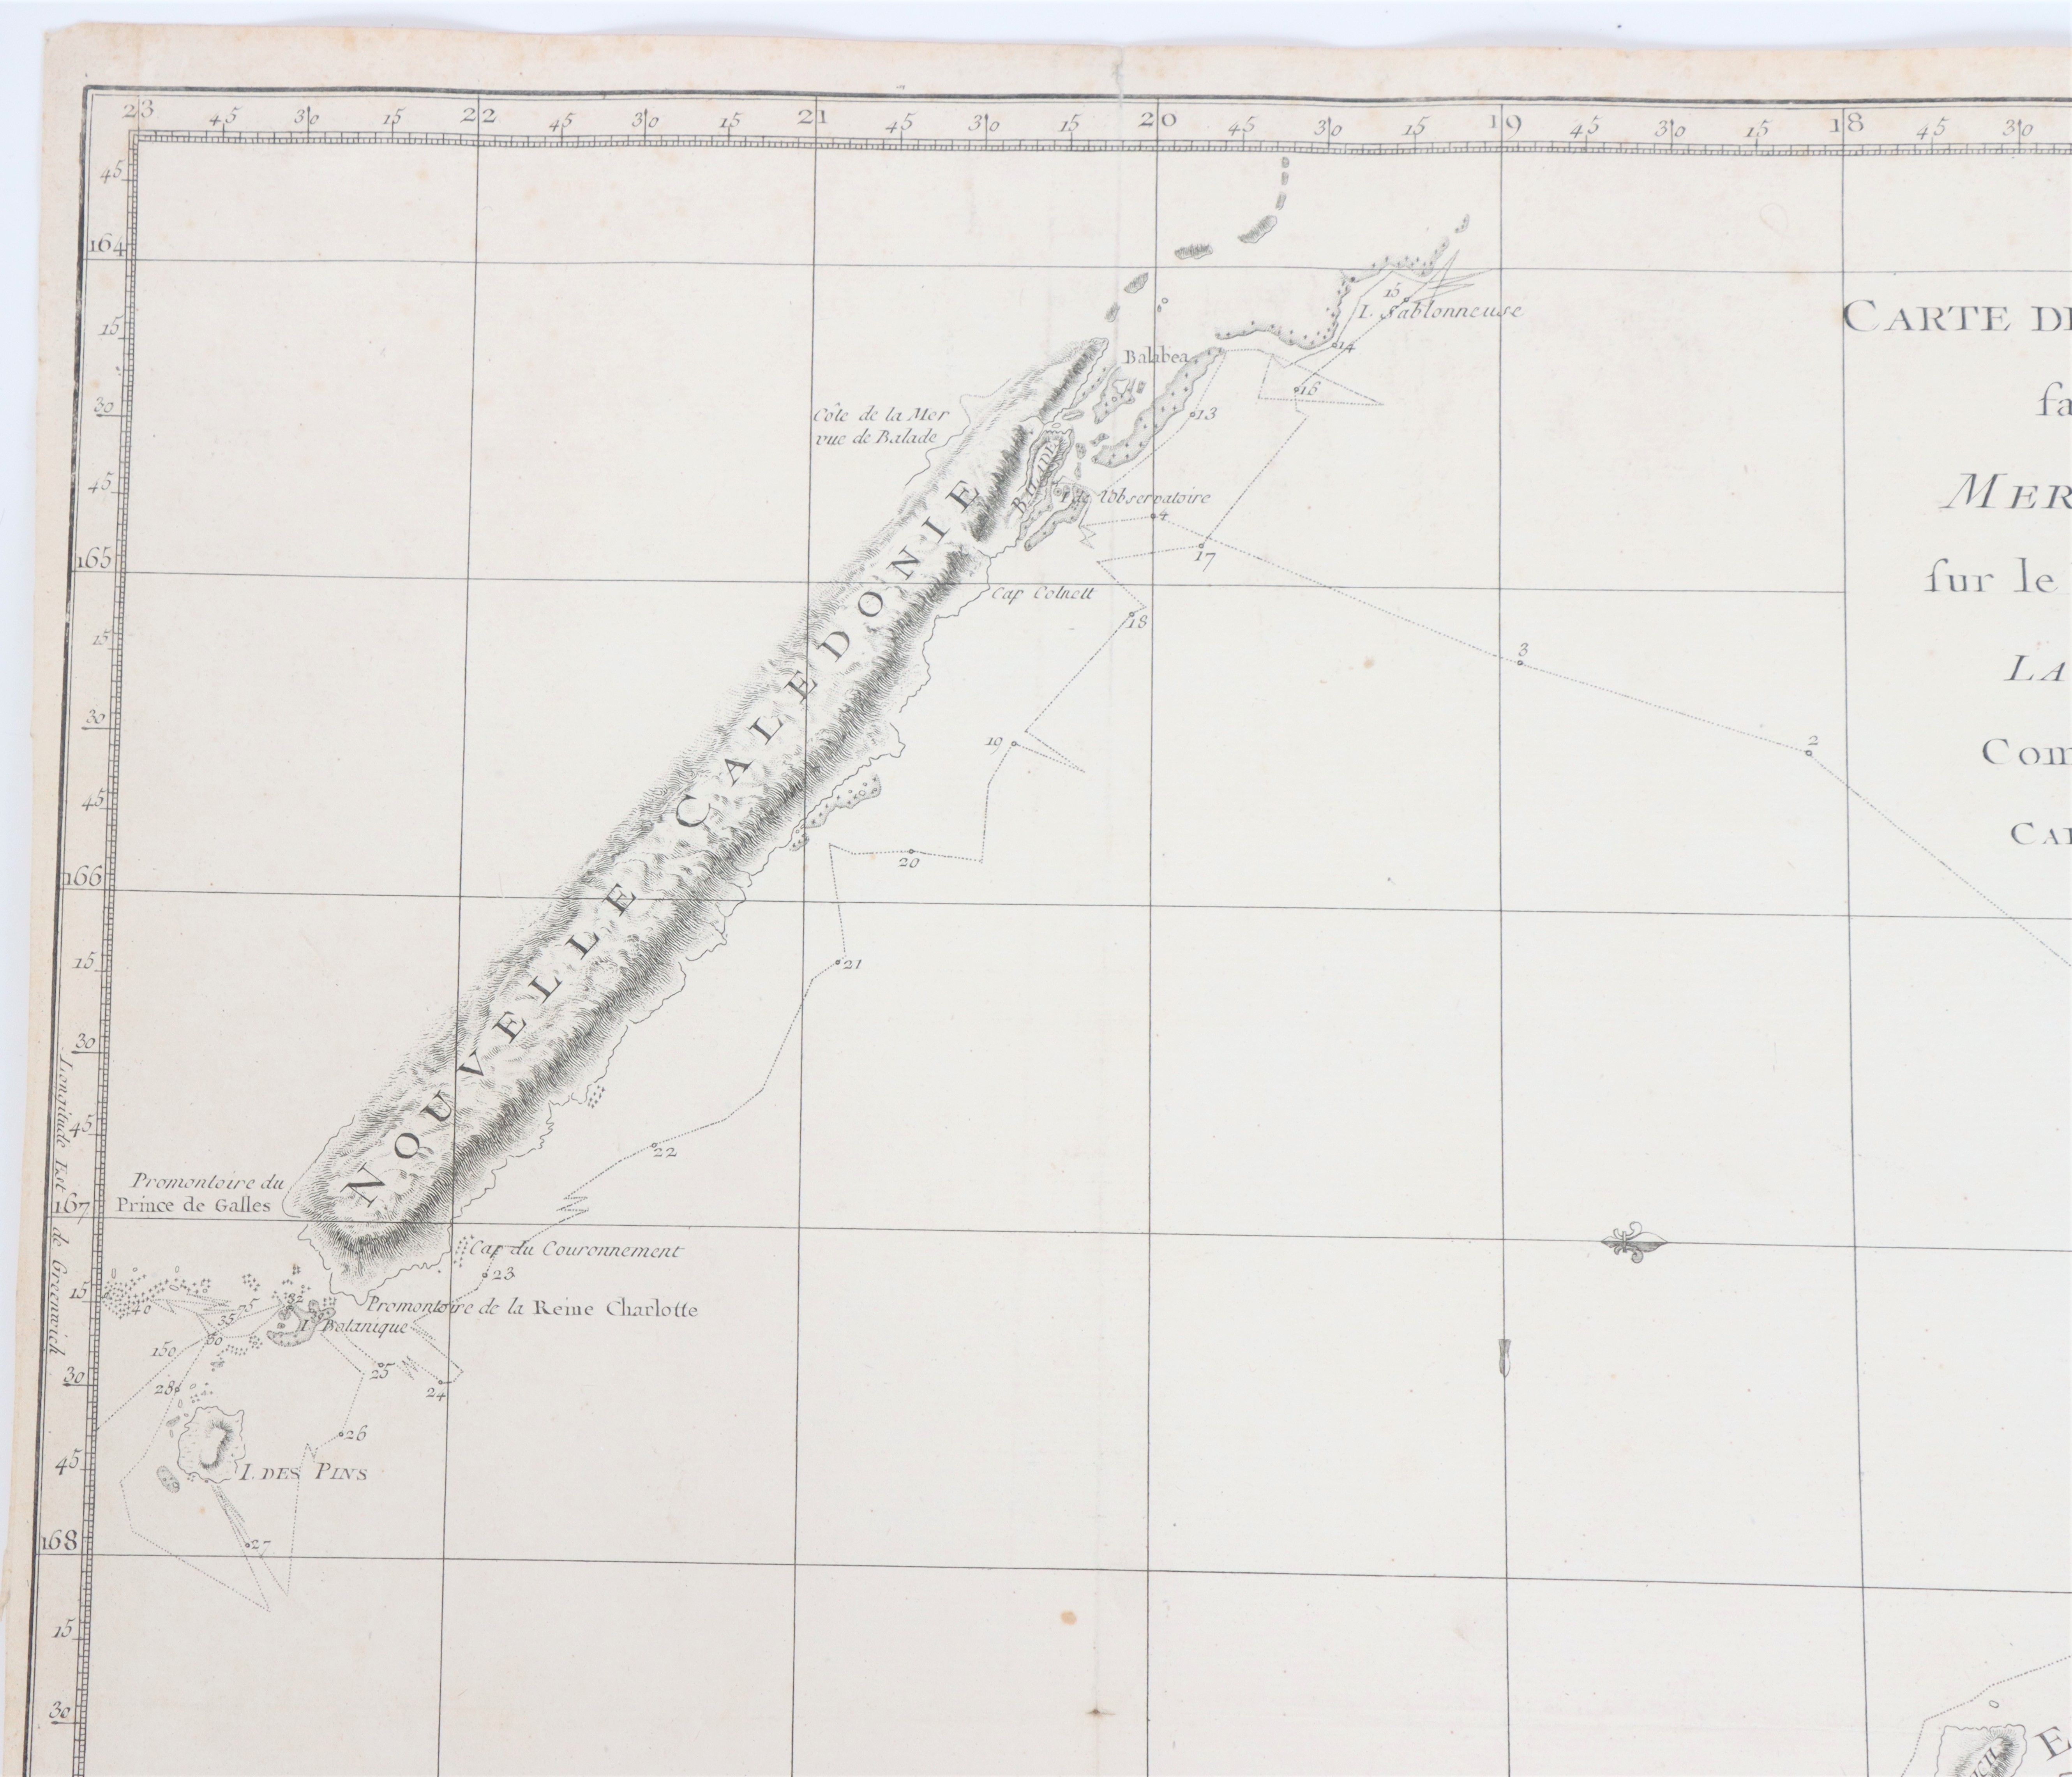 Captain James Cook Map of New Caledonia 1778 - Image 2 of 13